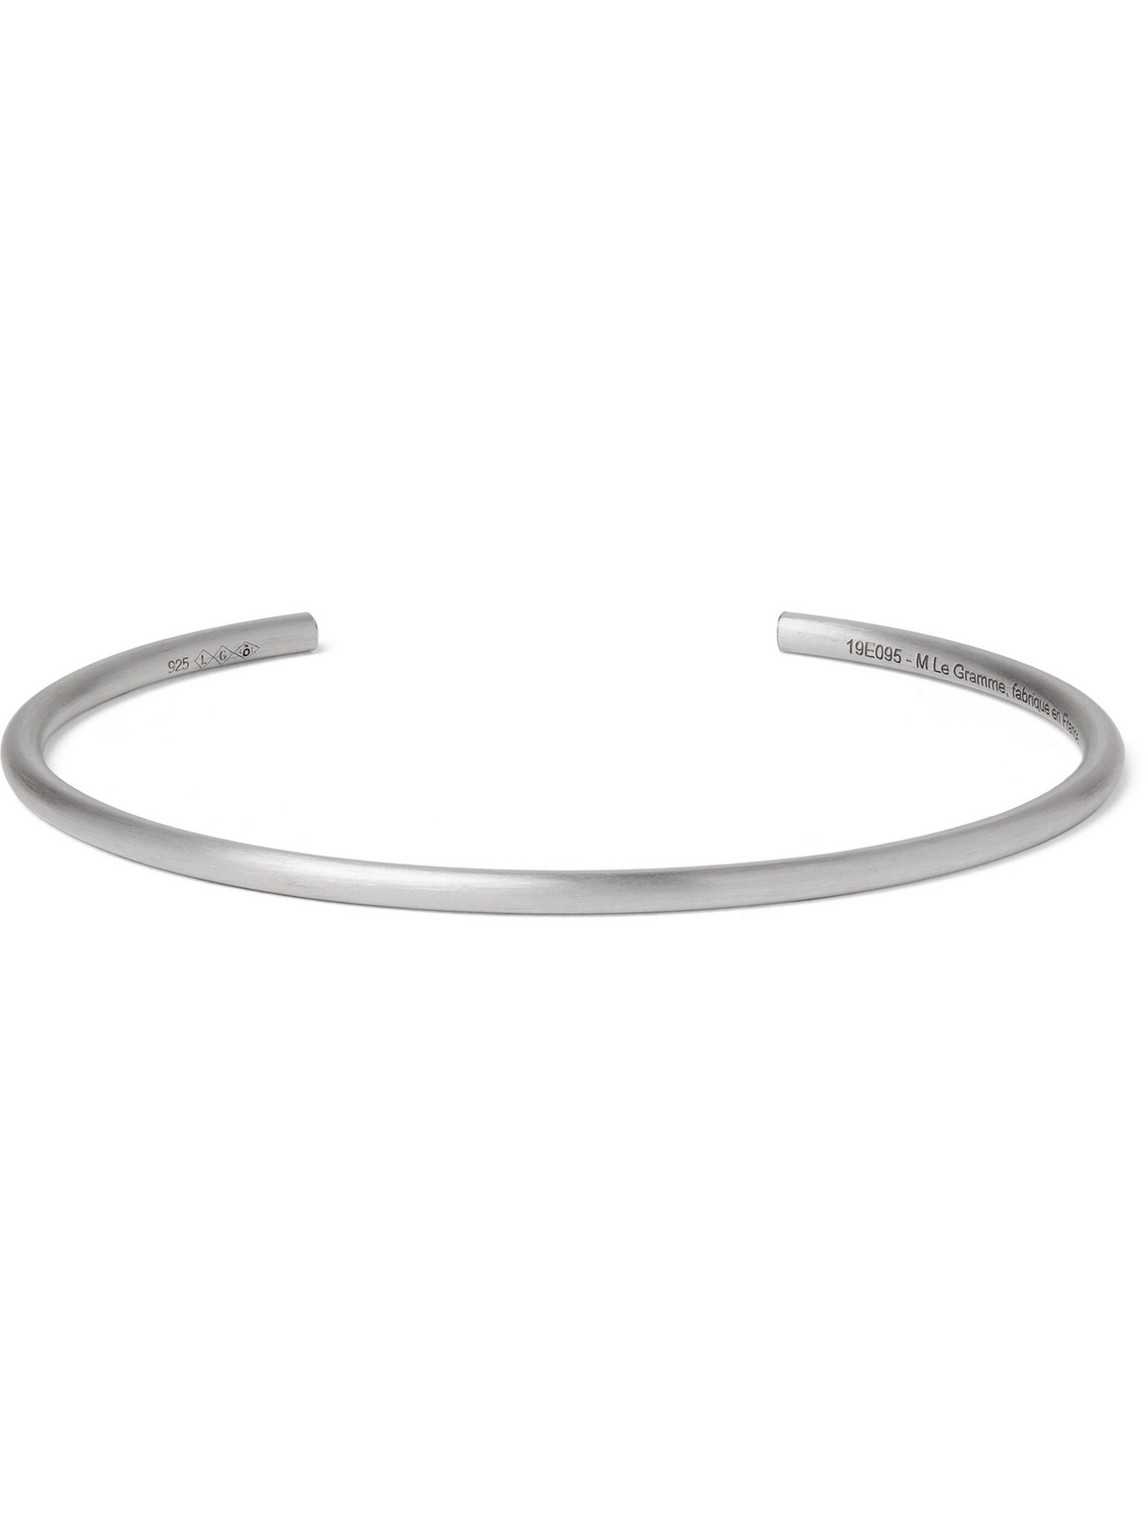 Le Gramme Le 7 Brushed Sterling Silver Cuff